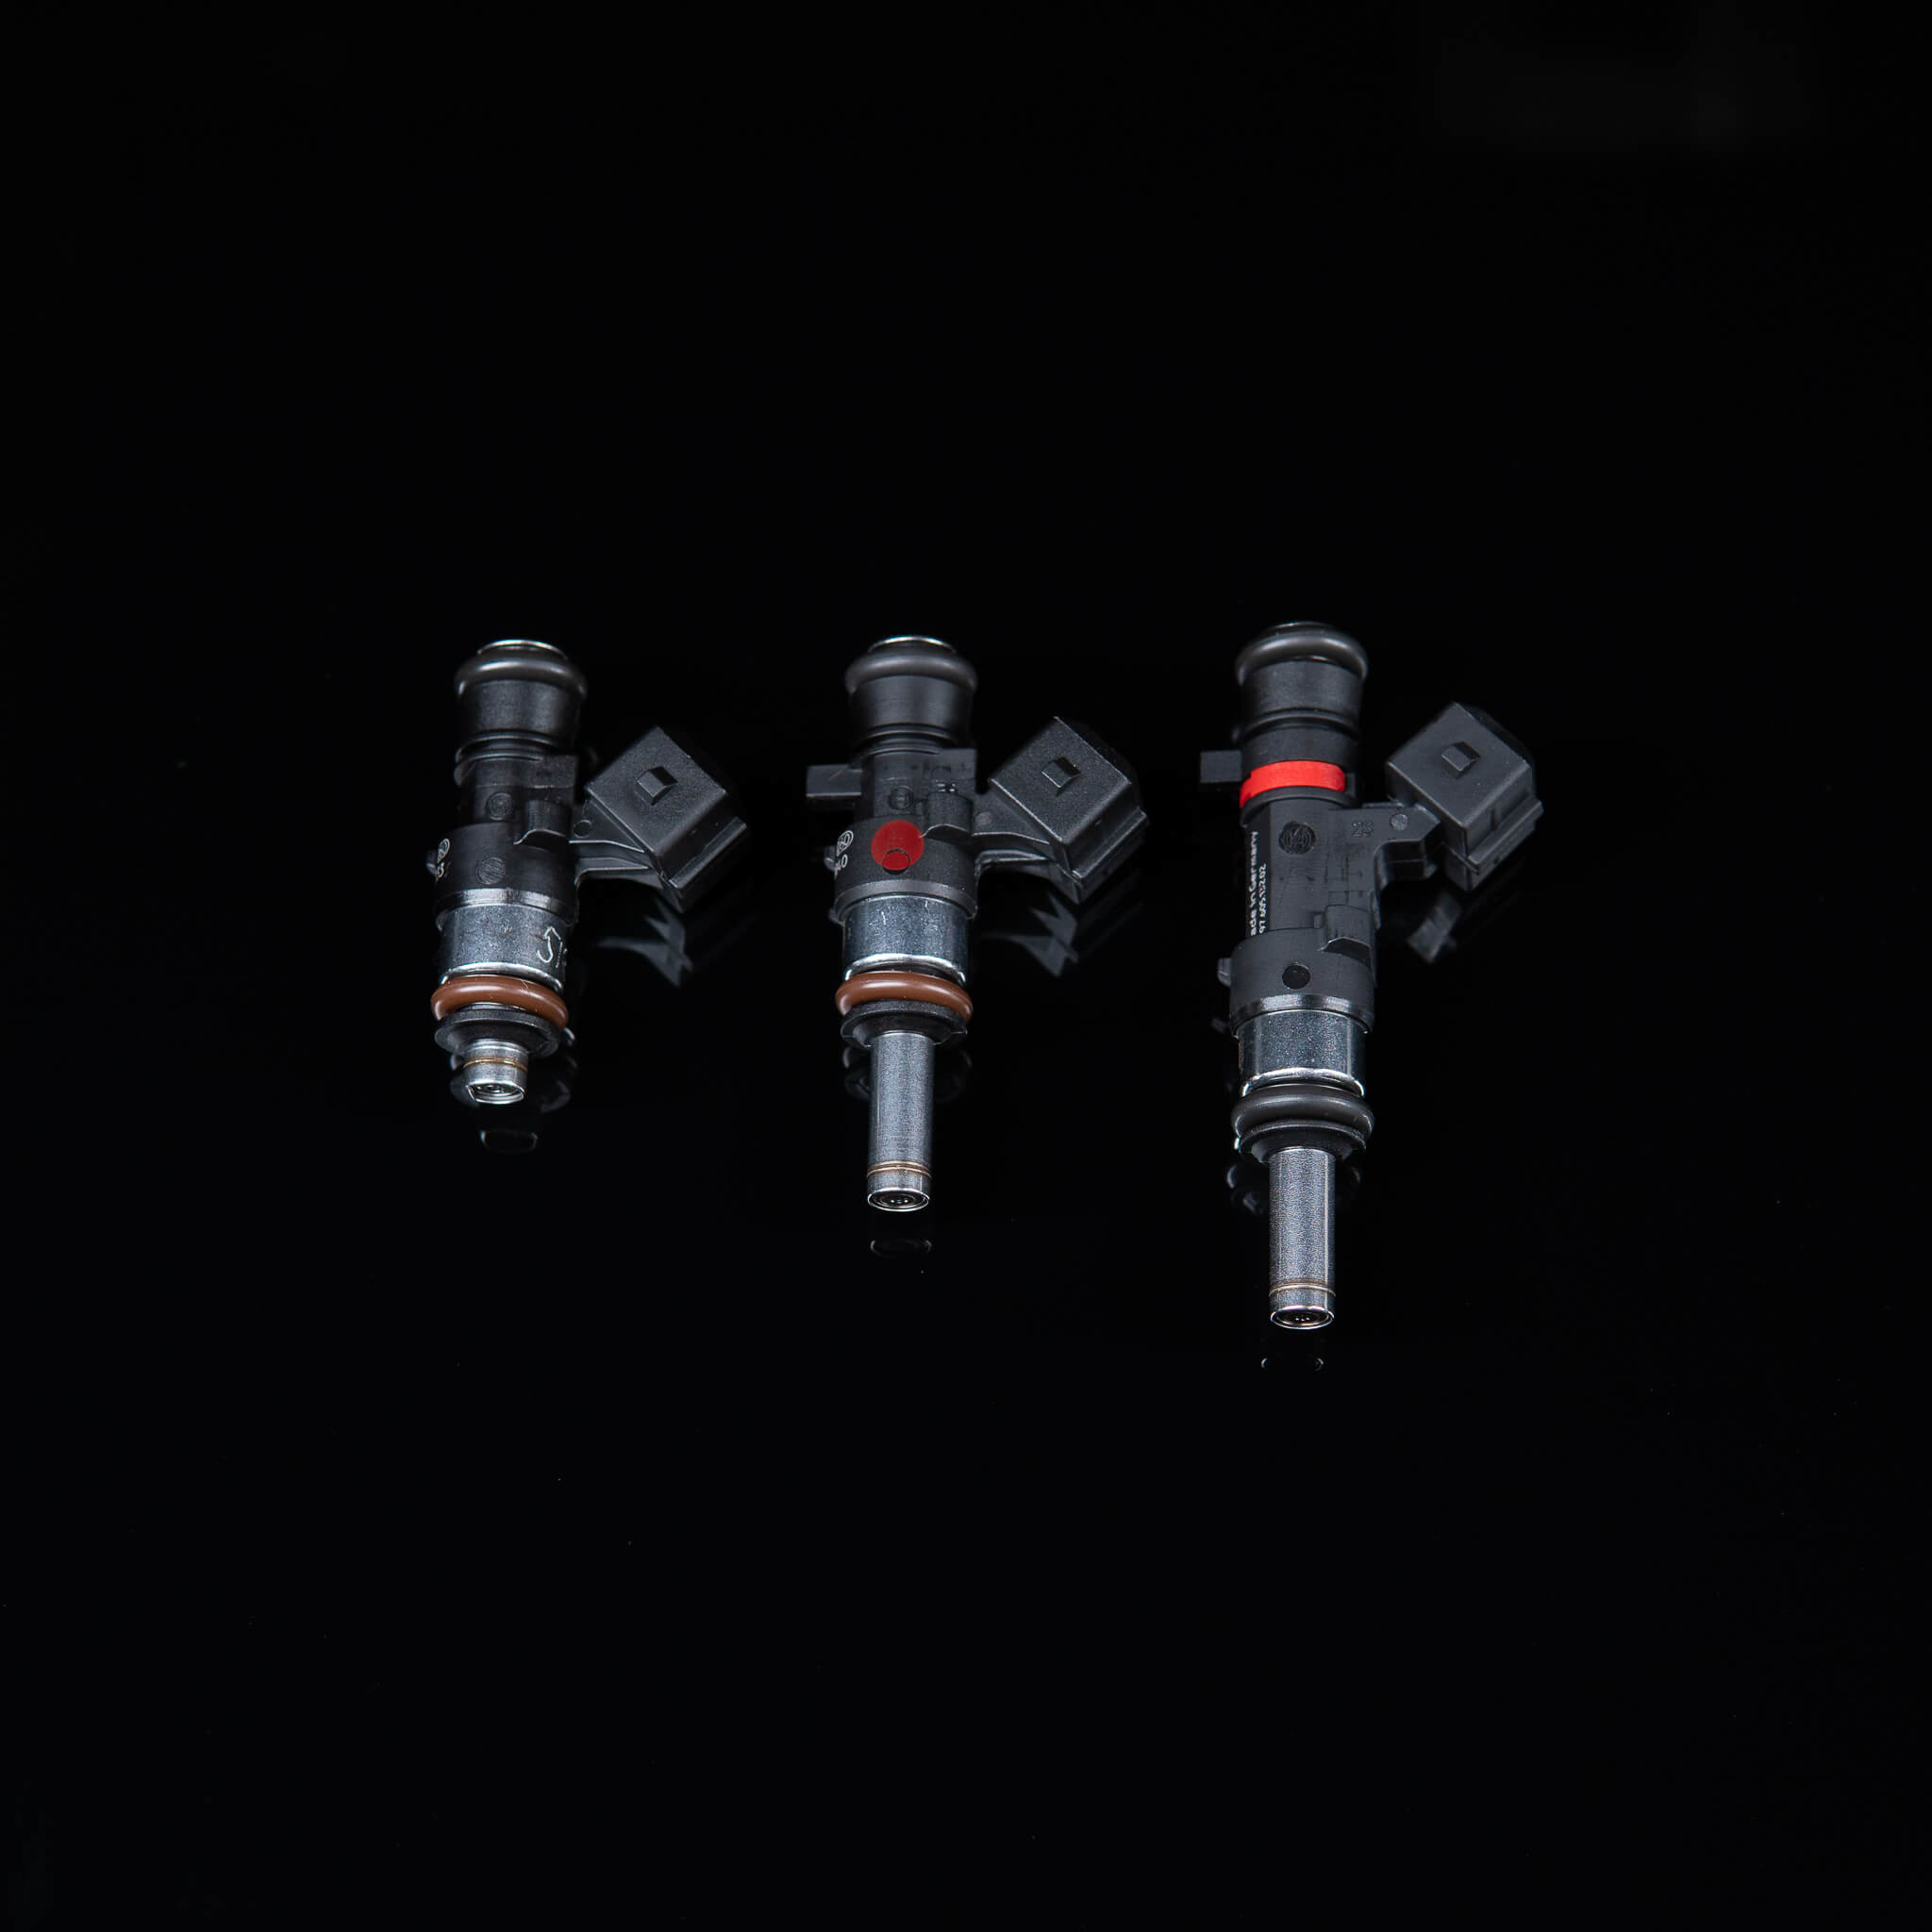 https://www.the-tuner.com/wp-content/uploads/2021/10/THE-Einspritzduesen-Fuel-Injector-THE-B5-033-04-THE-B5-033-05-THE-B5-033-06.jpg